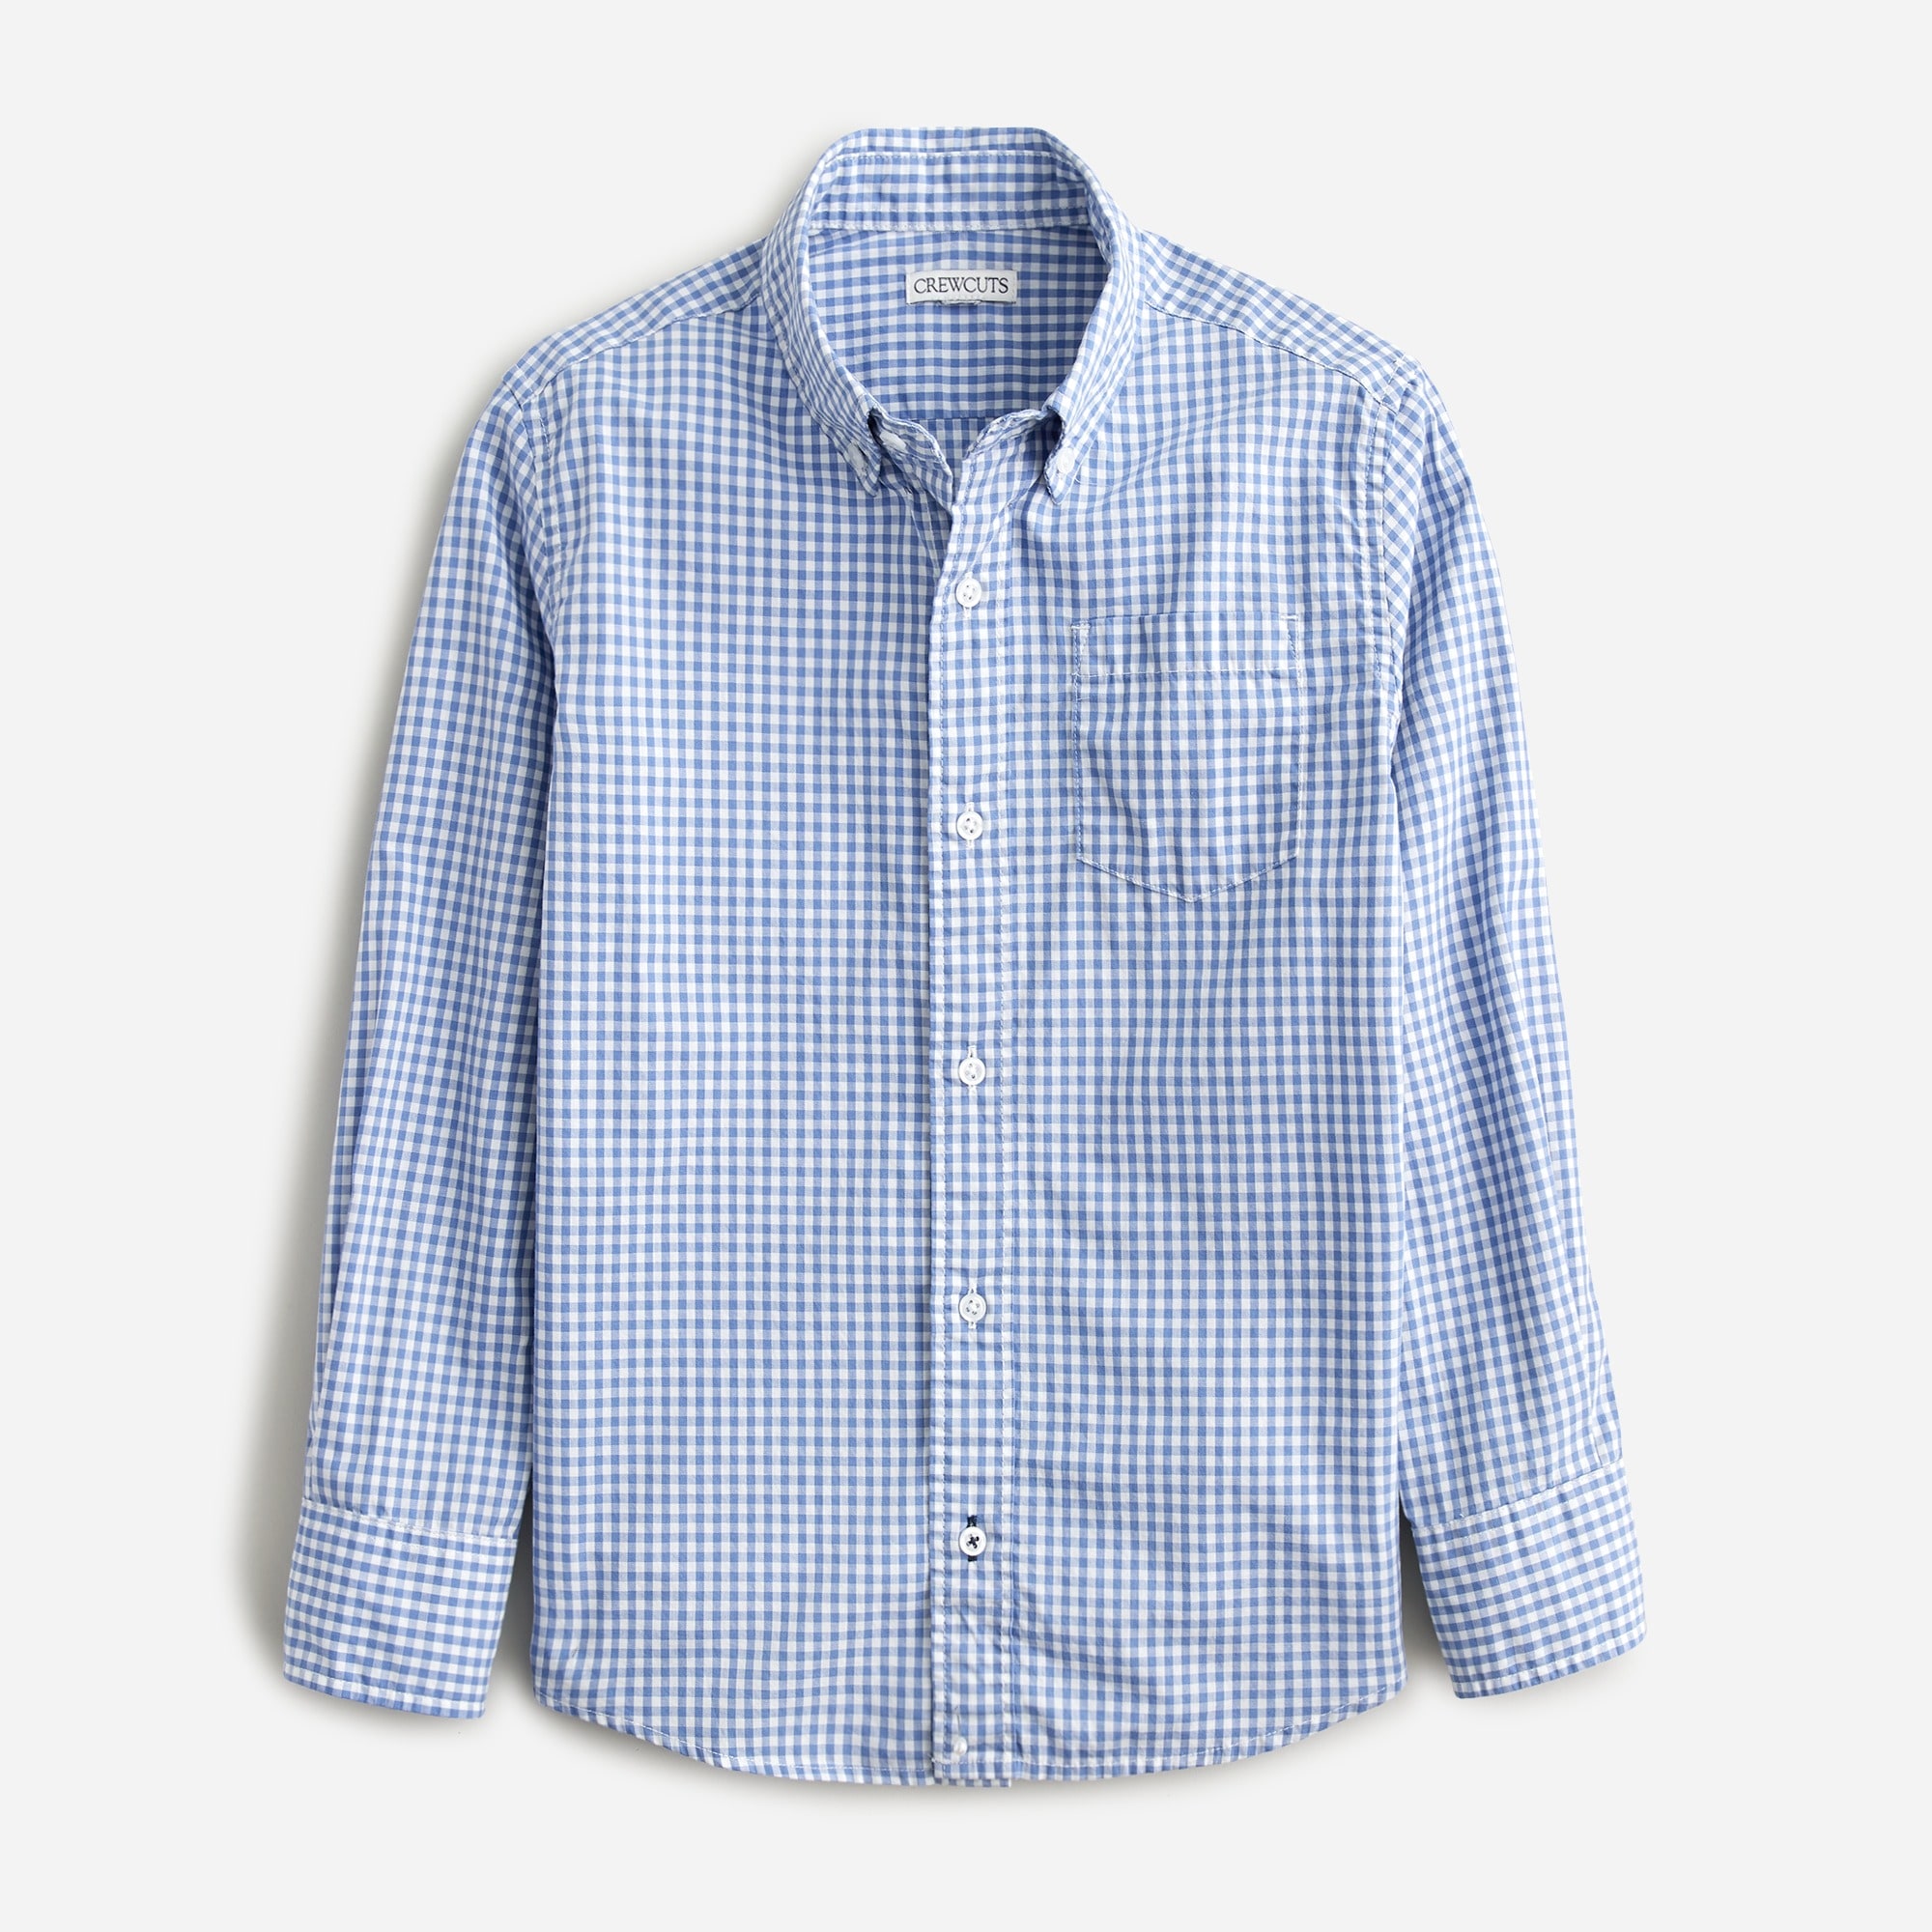  Boys' washed button-down poplin shirt in gingham